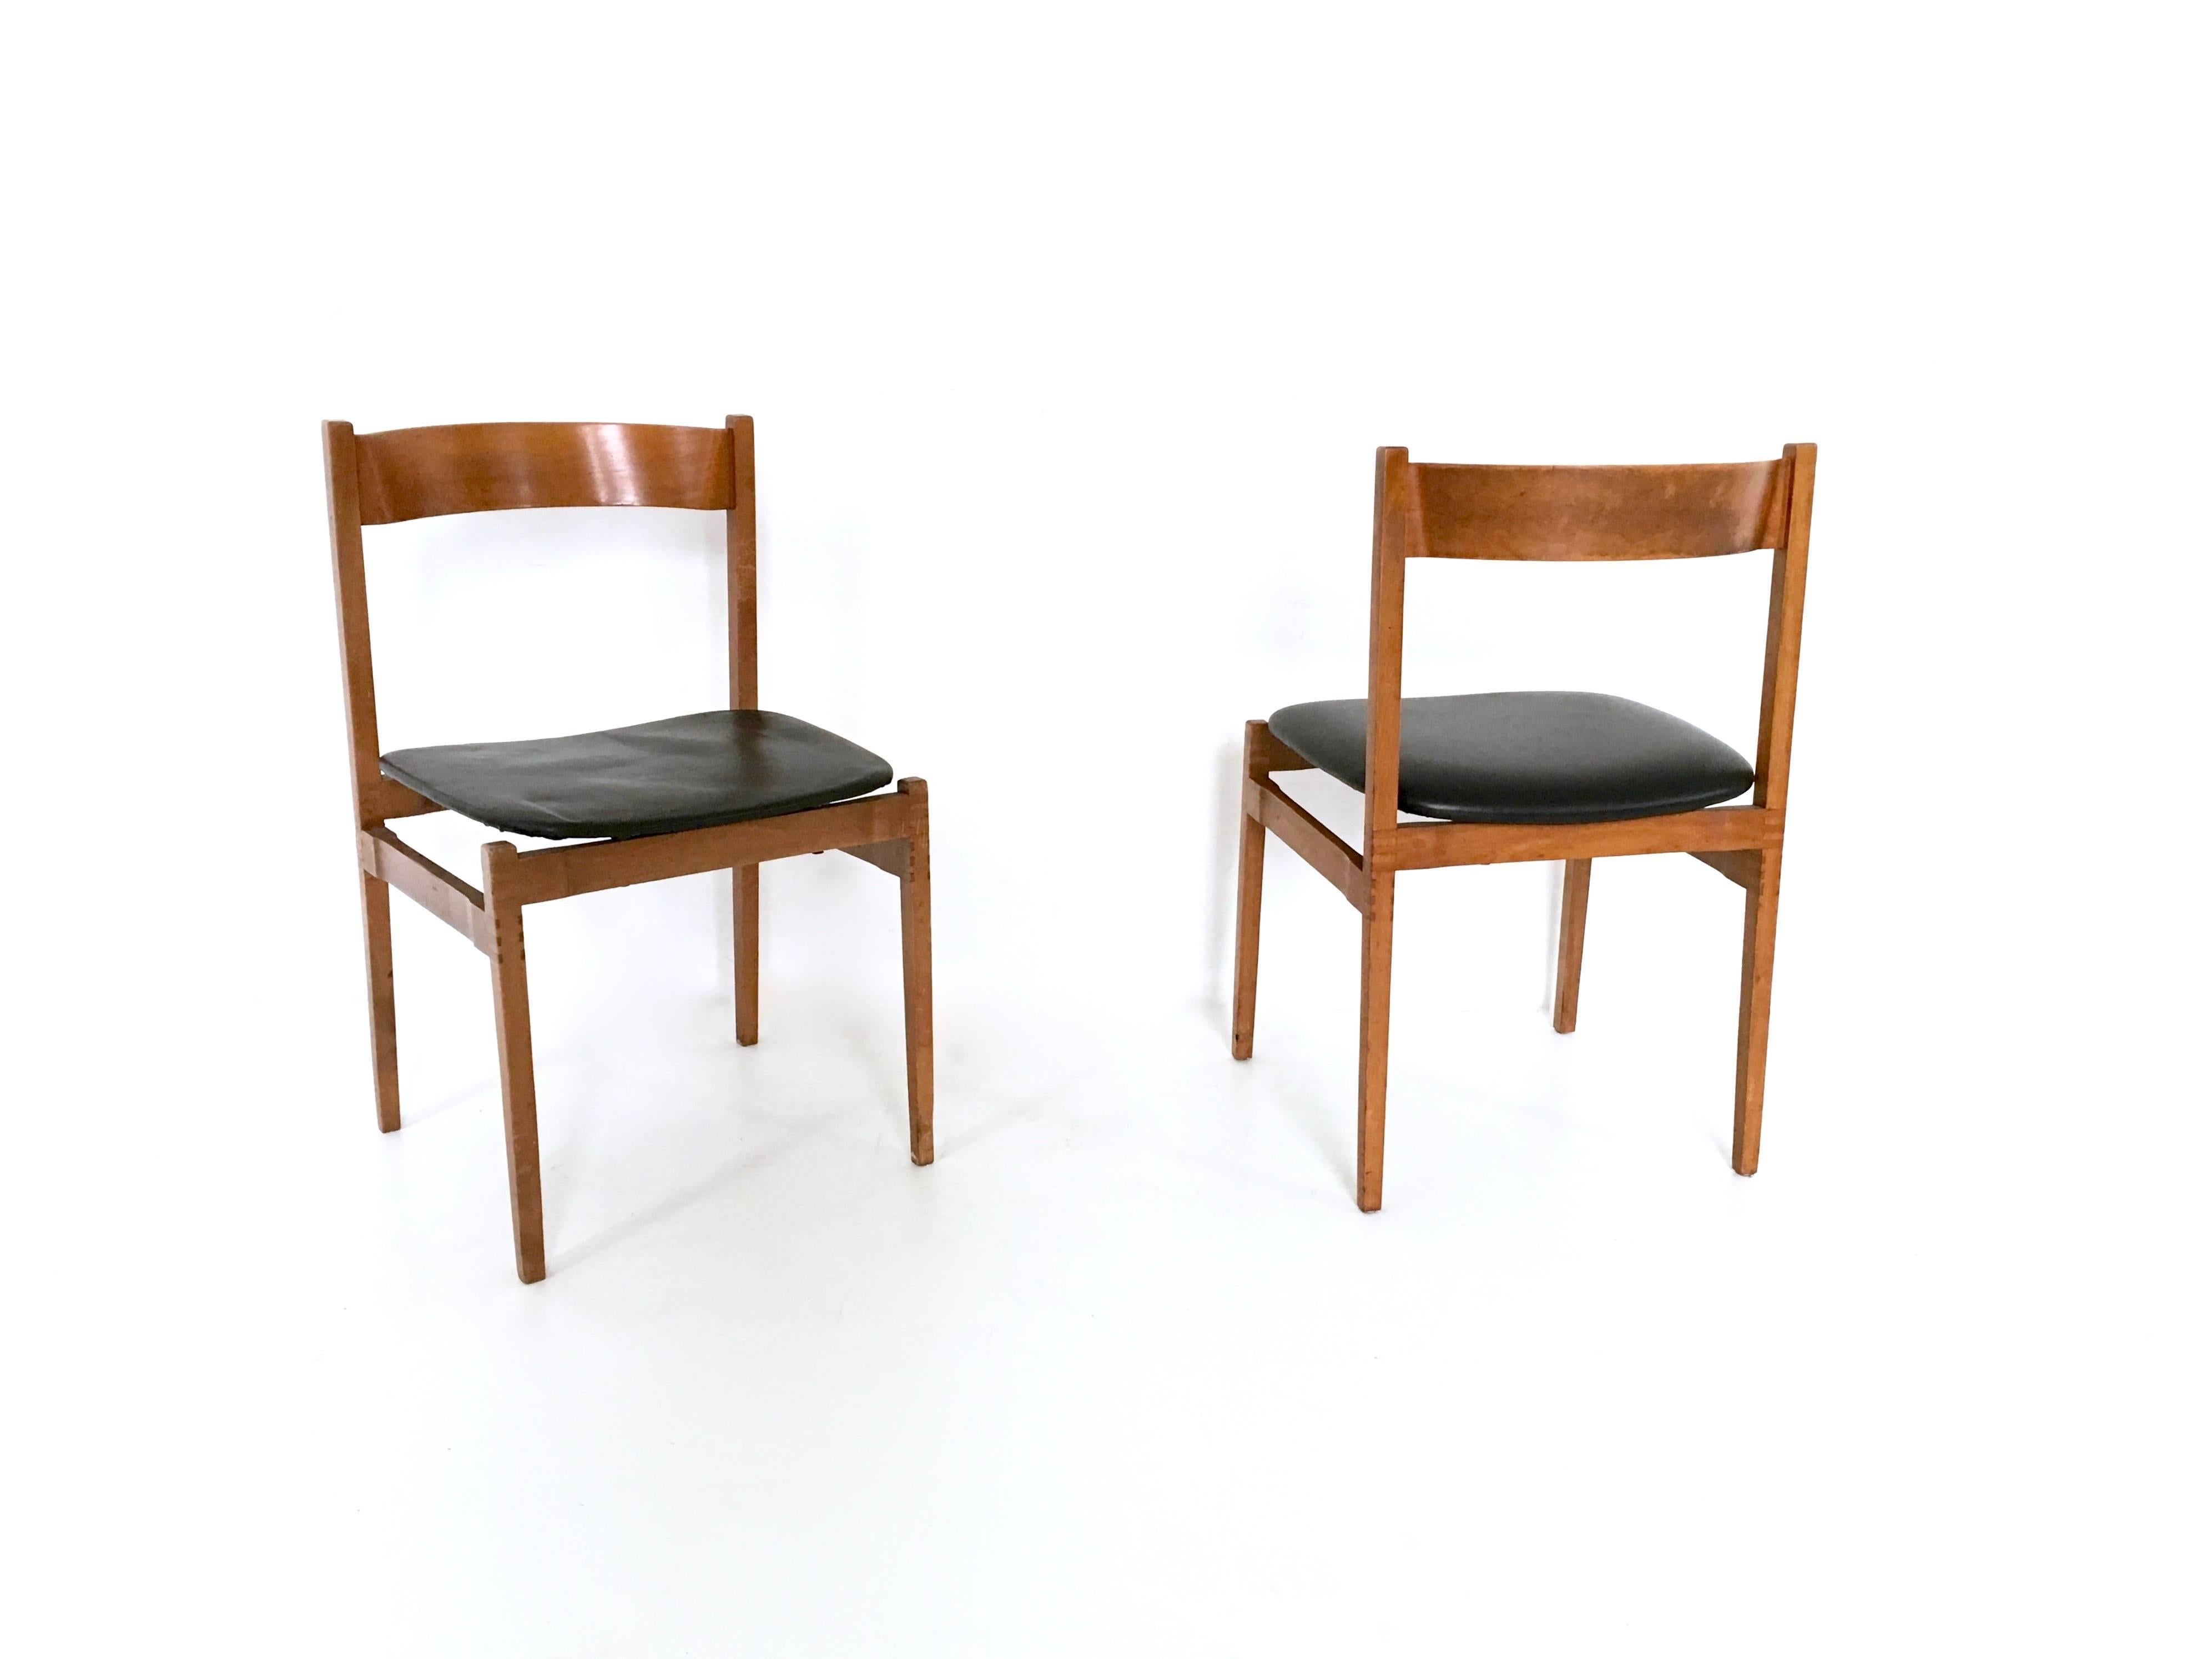 Mid-20th Century Set of Four Chairs by Gianfranco Frattini for Cassina, 1950s